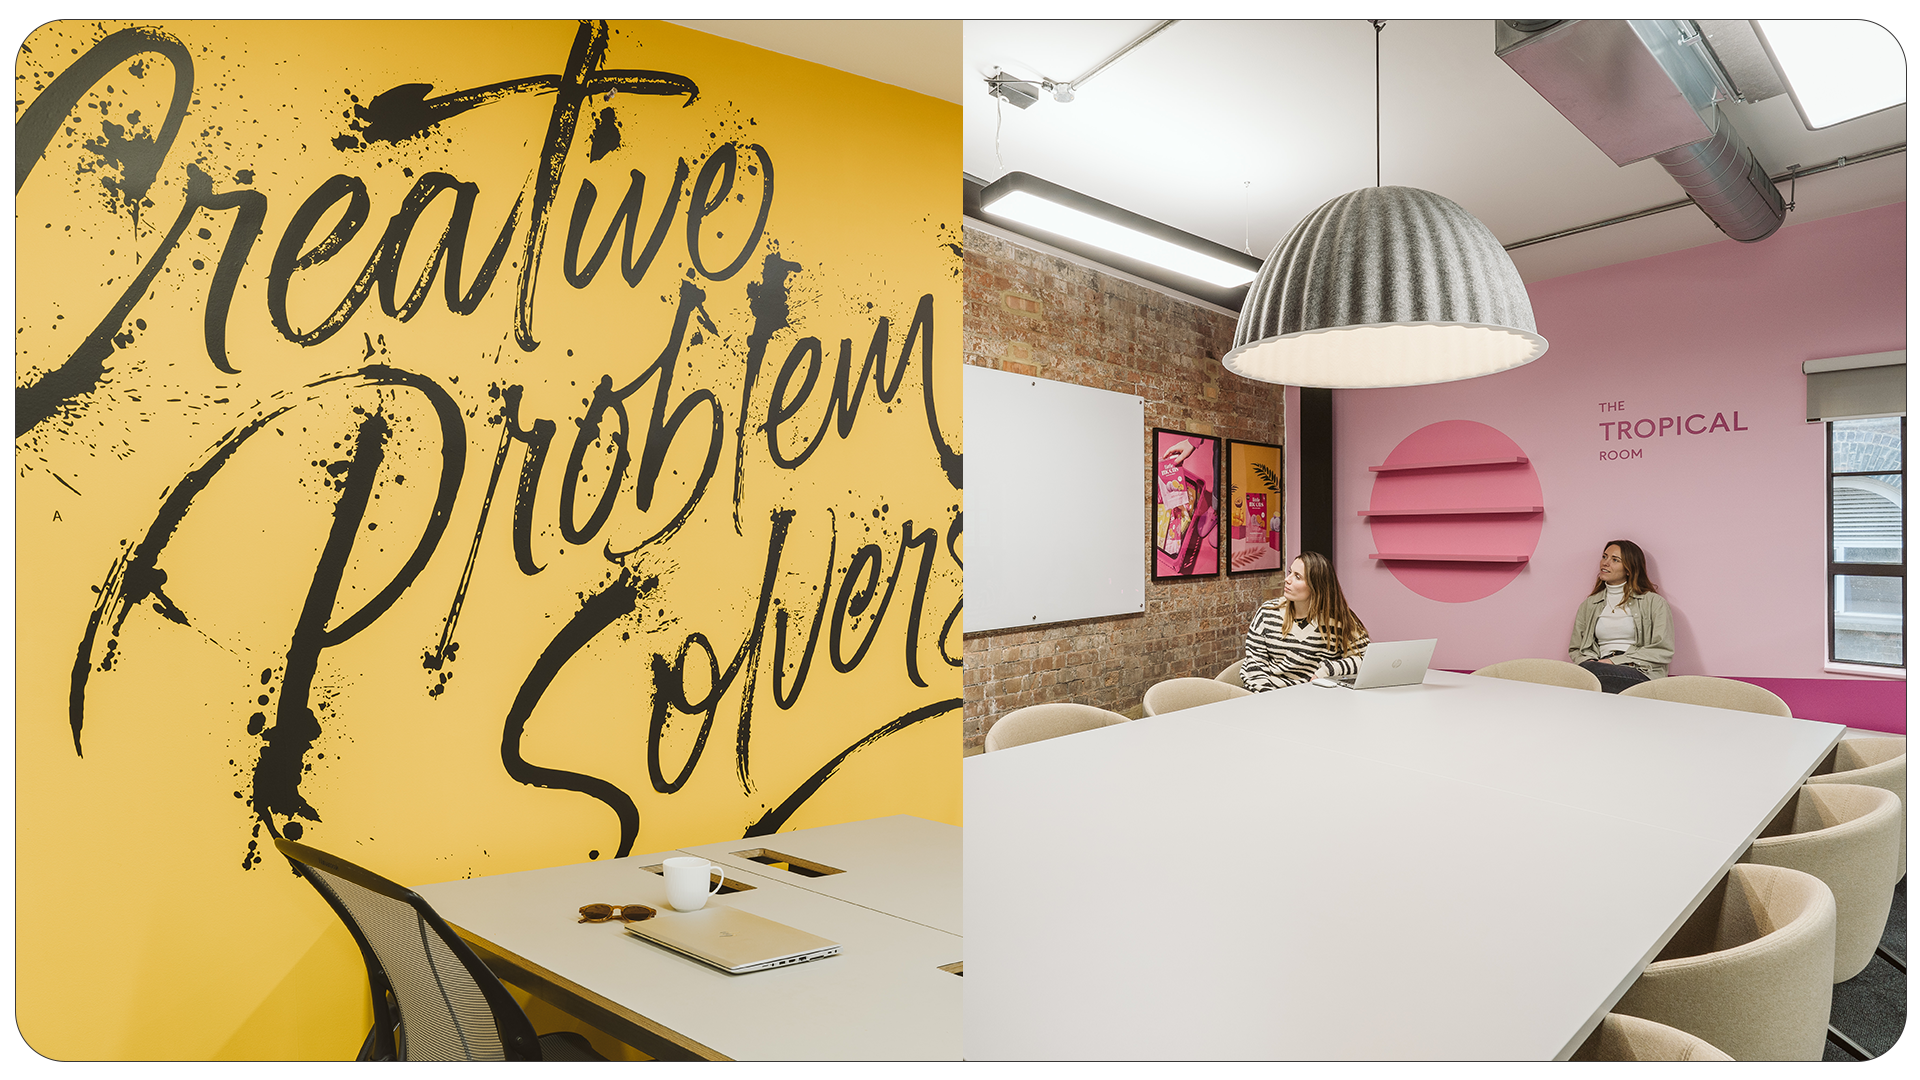 Office Space Branding and Art Decoration Design